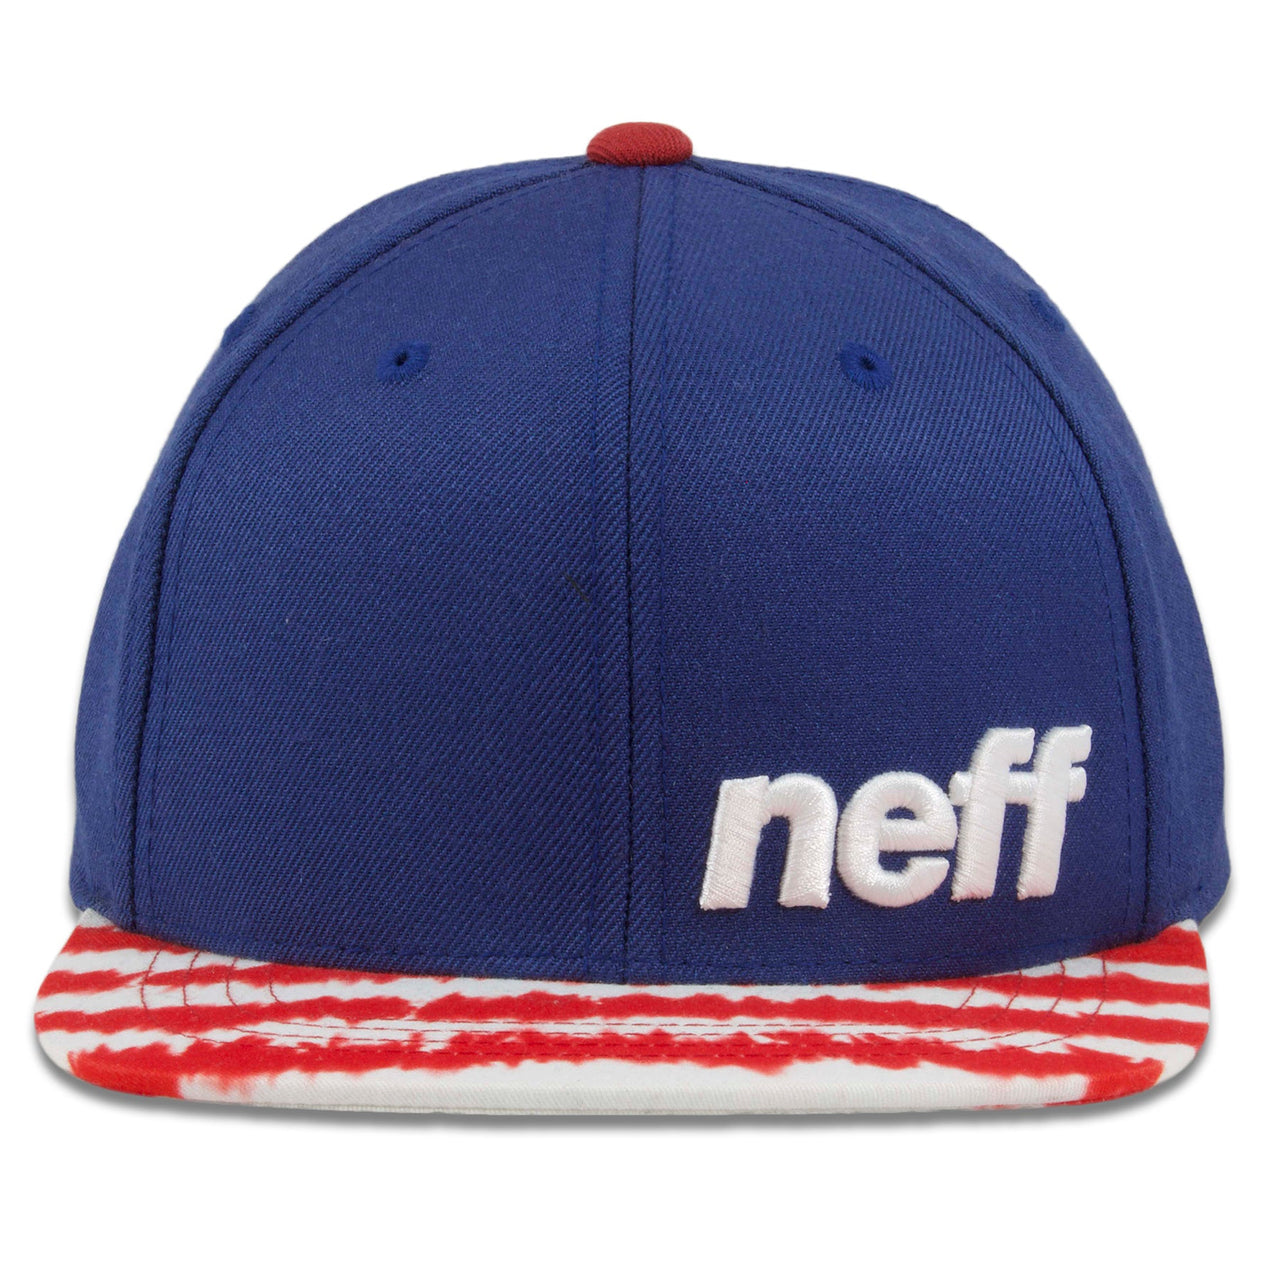 Neff Youth Daily Royal Blue on Red Tie-Dye Snapback Hat